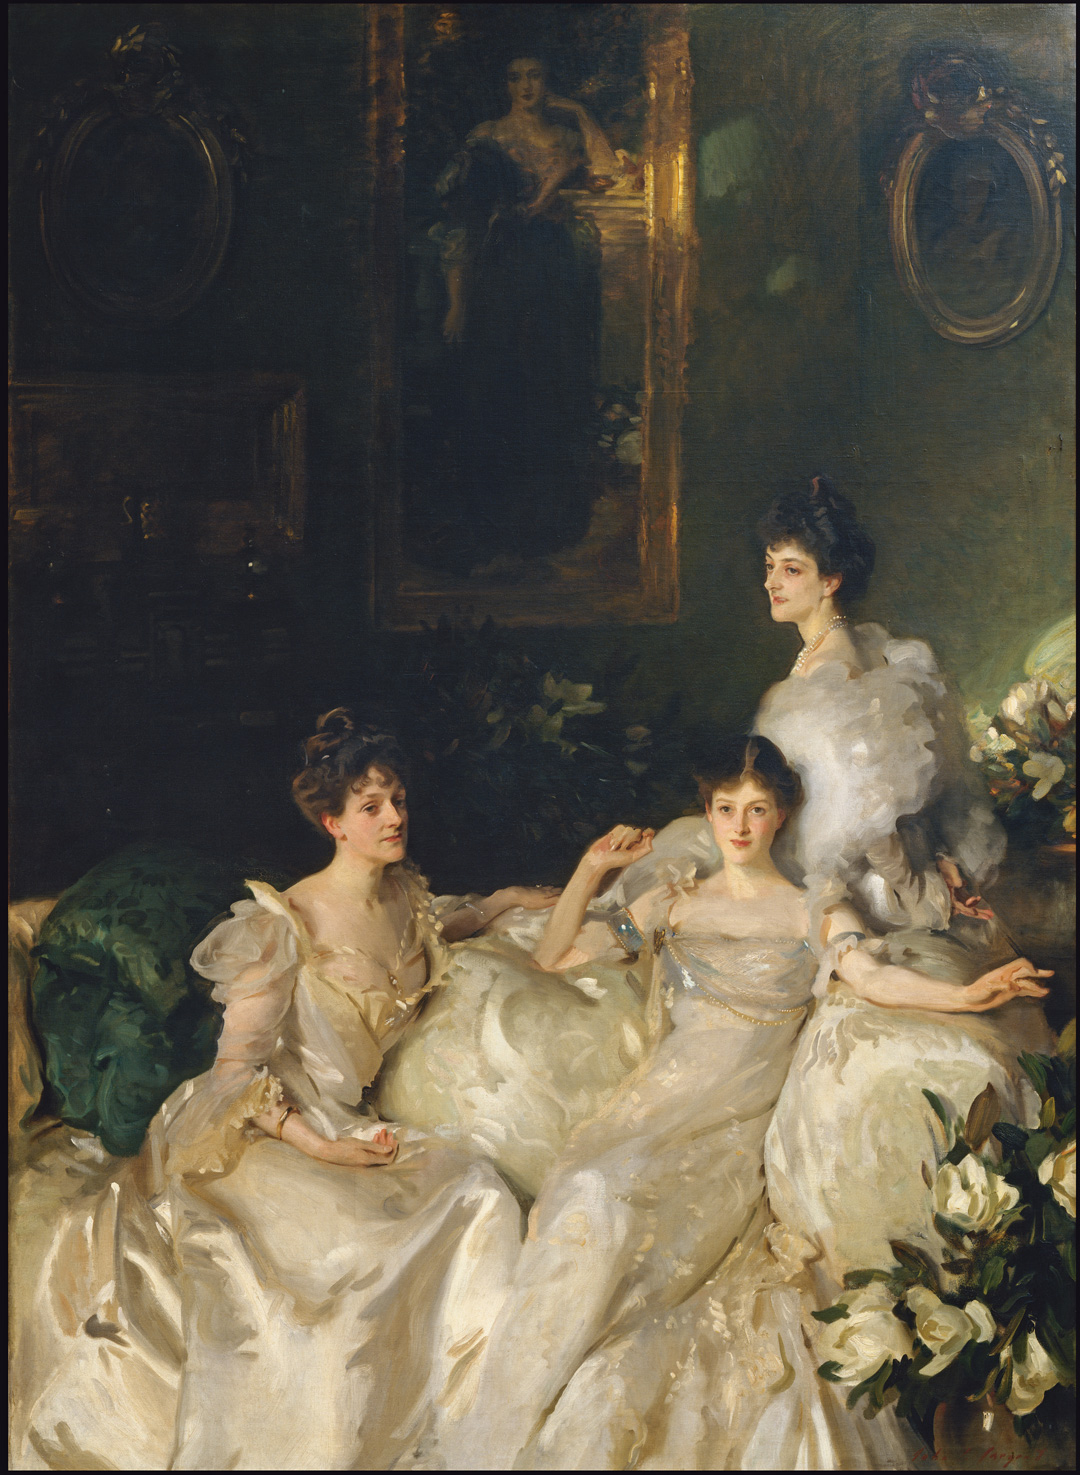 The Wyndham Sisters (1899) by John Singer Sargent, as featured in The Artist Project